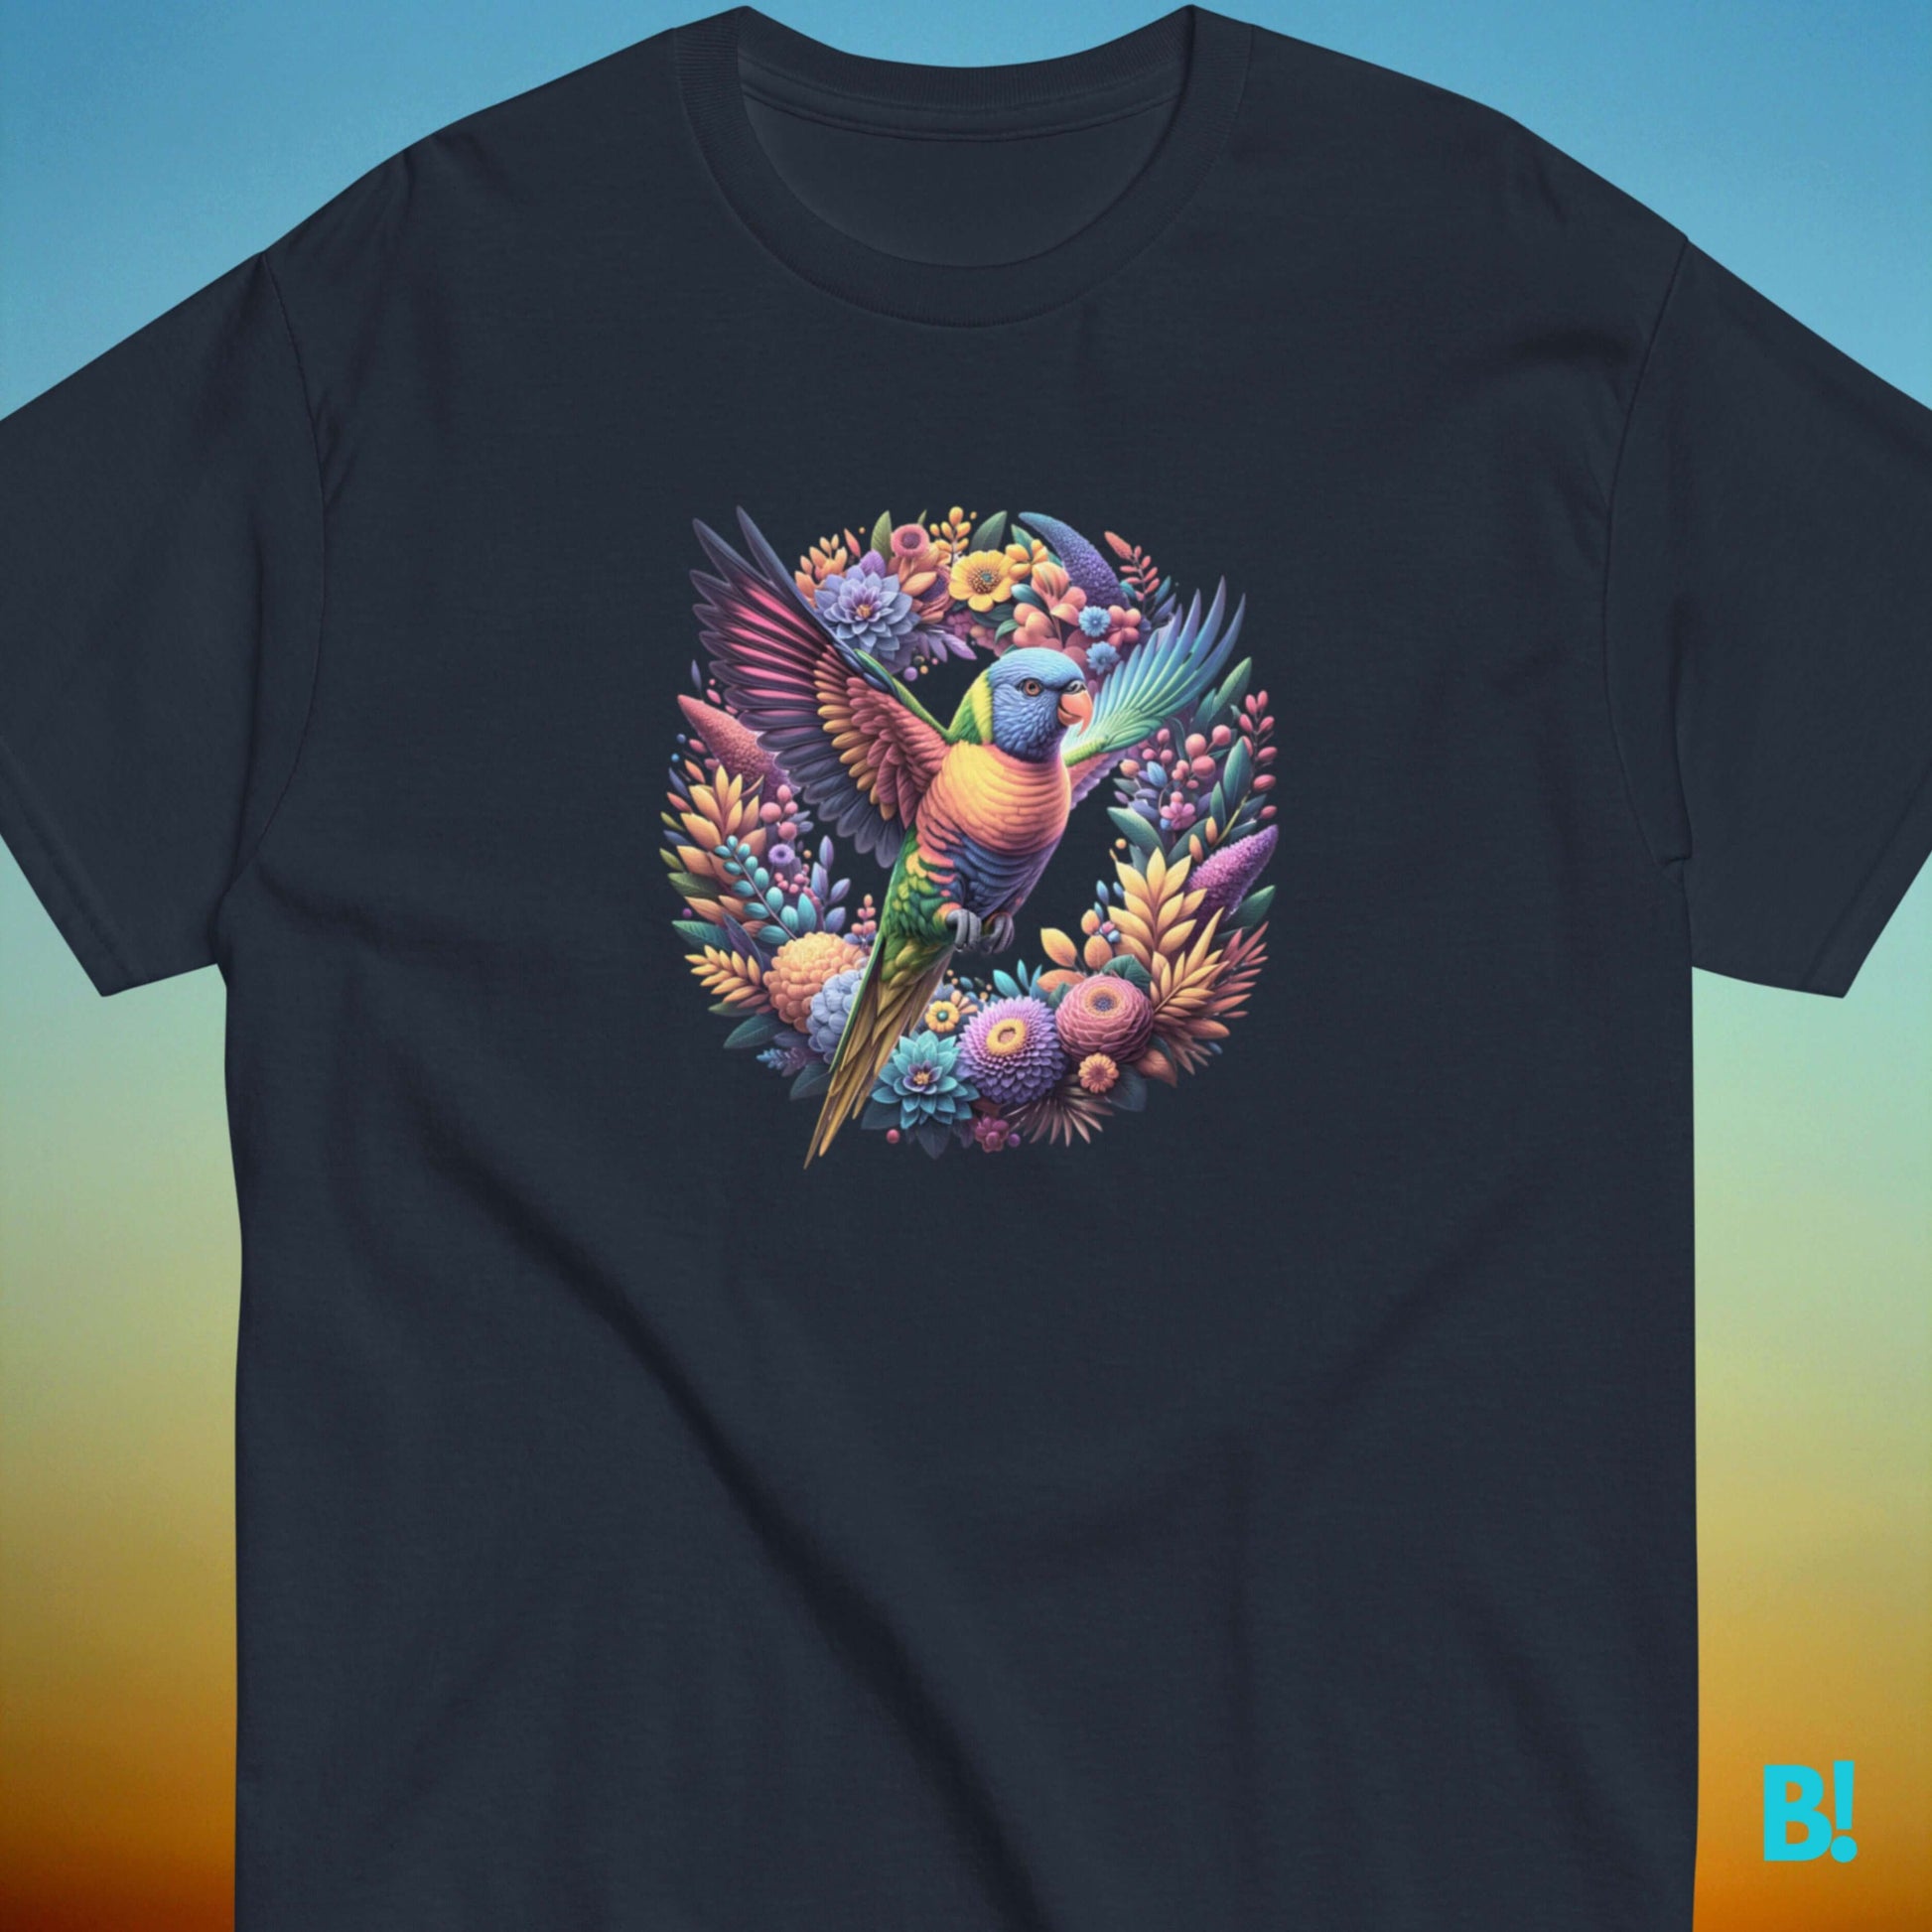 Rainbow Lorikeet T-Shirt - Bright & Comfy Cotton Tee Elevate your wardrobe with our Rainbow Lorikeet T-Shirt! Enjoy 100% cotton comfort in sizes S-XXXL. Features vibrant bird print by B!NKY Comfywear. €29.50 B!NKY Comfywear